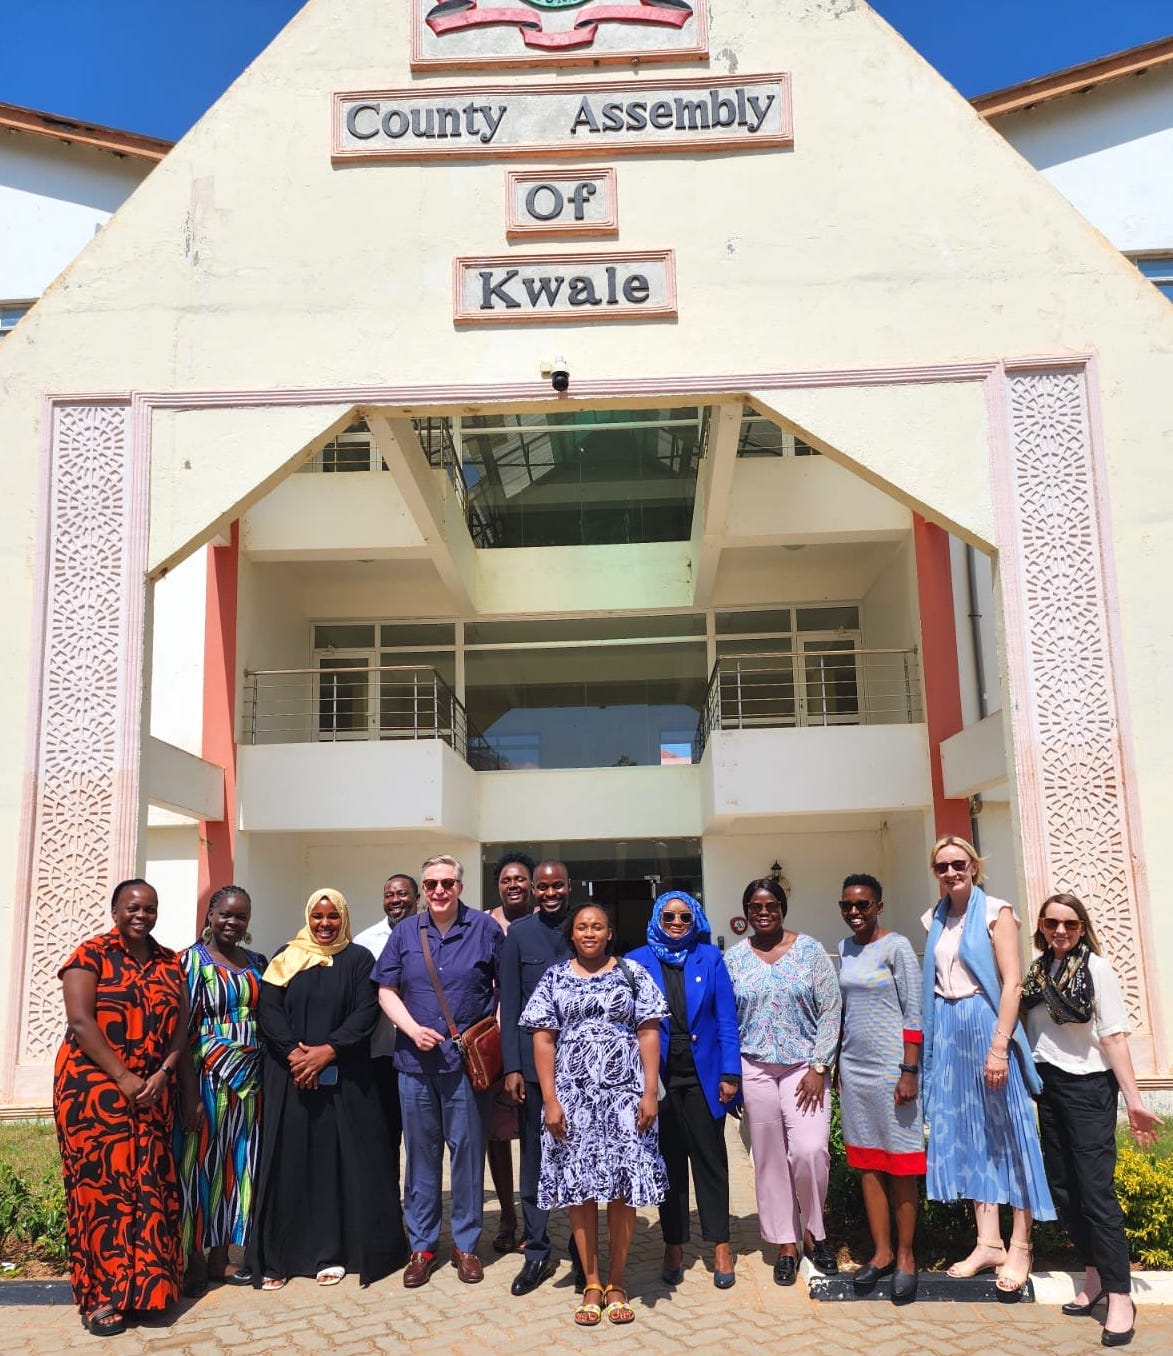 The Delegation at County Assembly of Kwale: Photo: UN Women/Sharon Kinyanjui